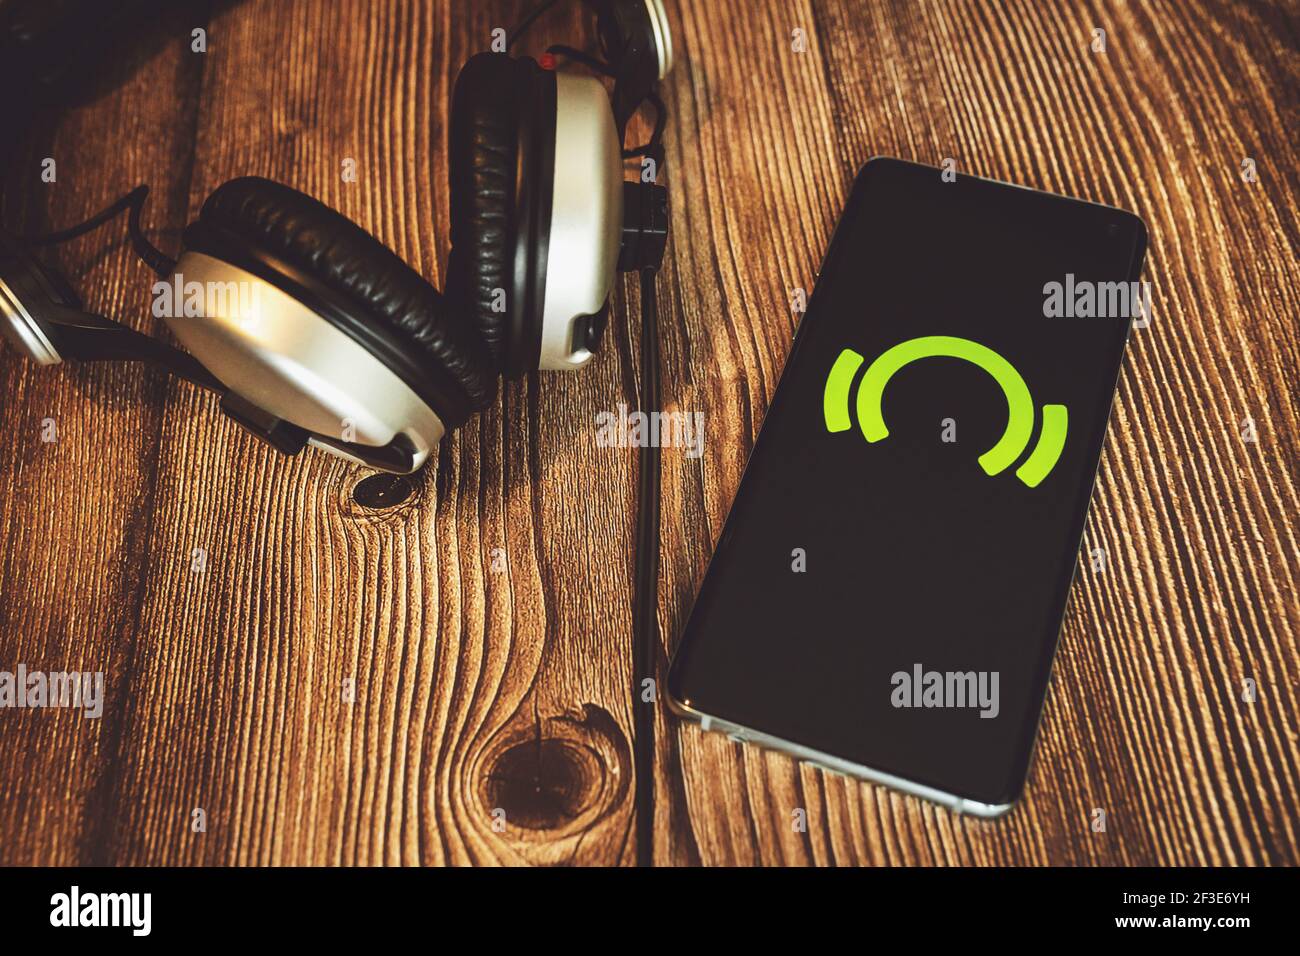 Smartphone with green Beatport logo on dark screen with headphones on wooden background. Online music store Stock Photo